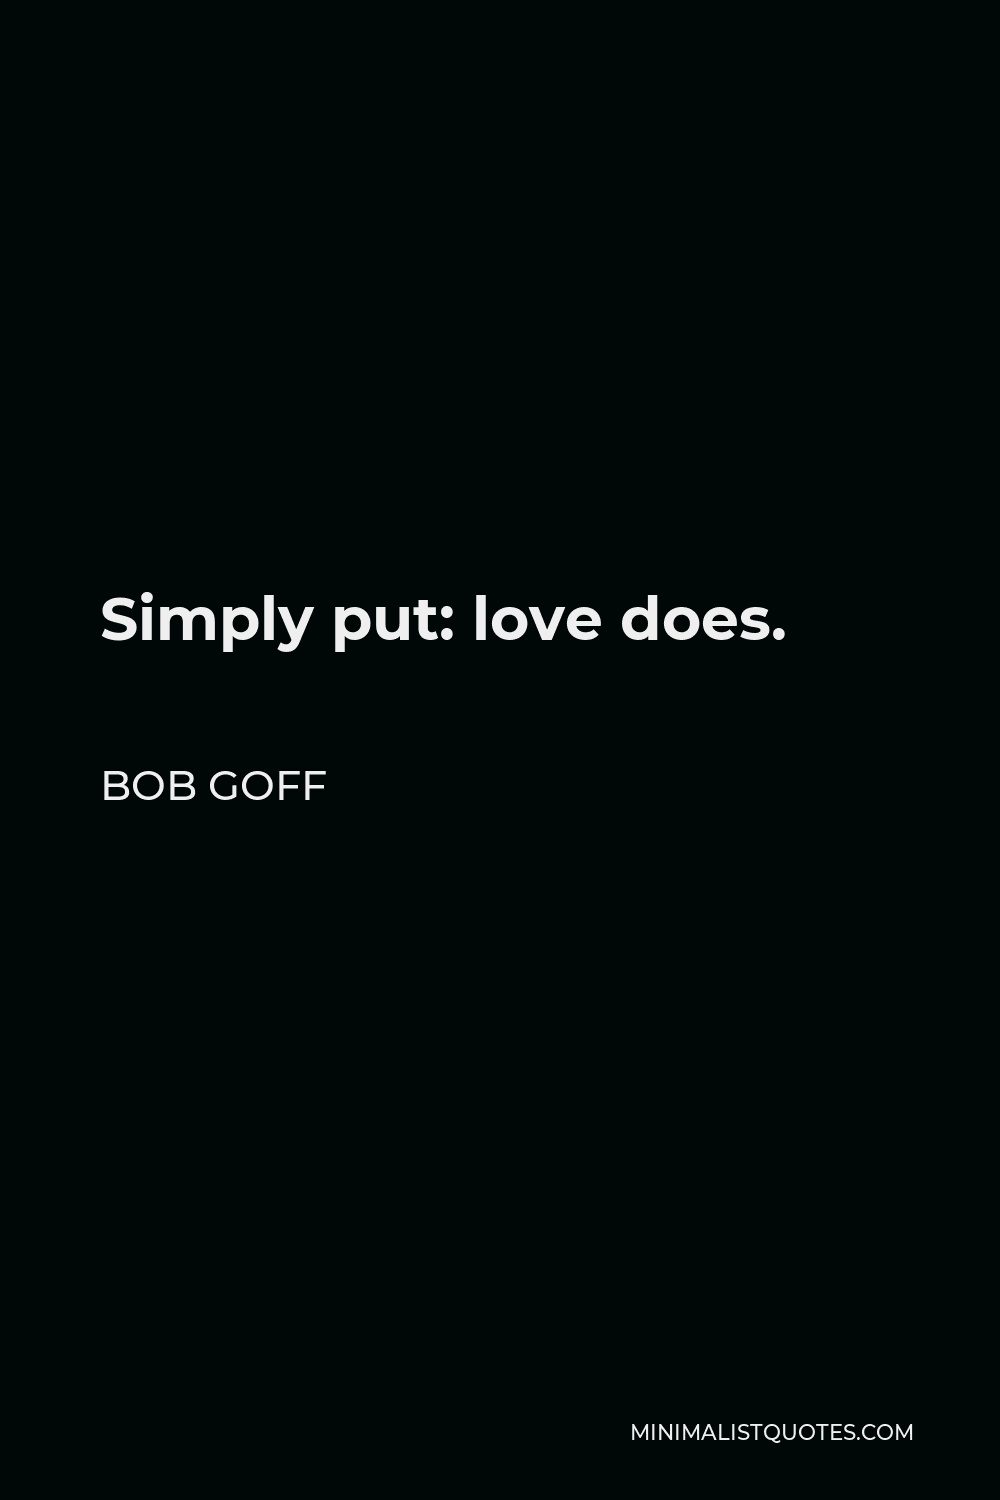 Bob Goff Quote - Simply put: love does.